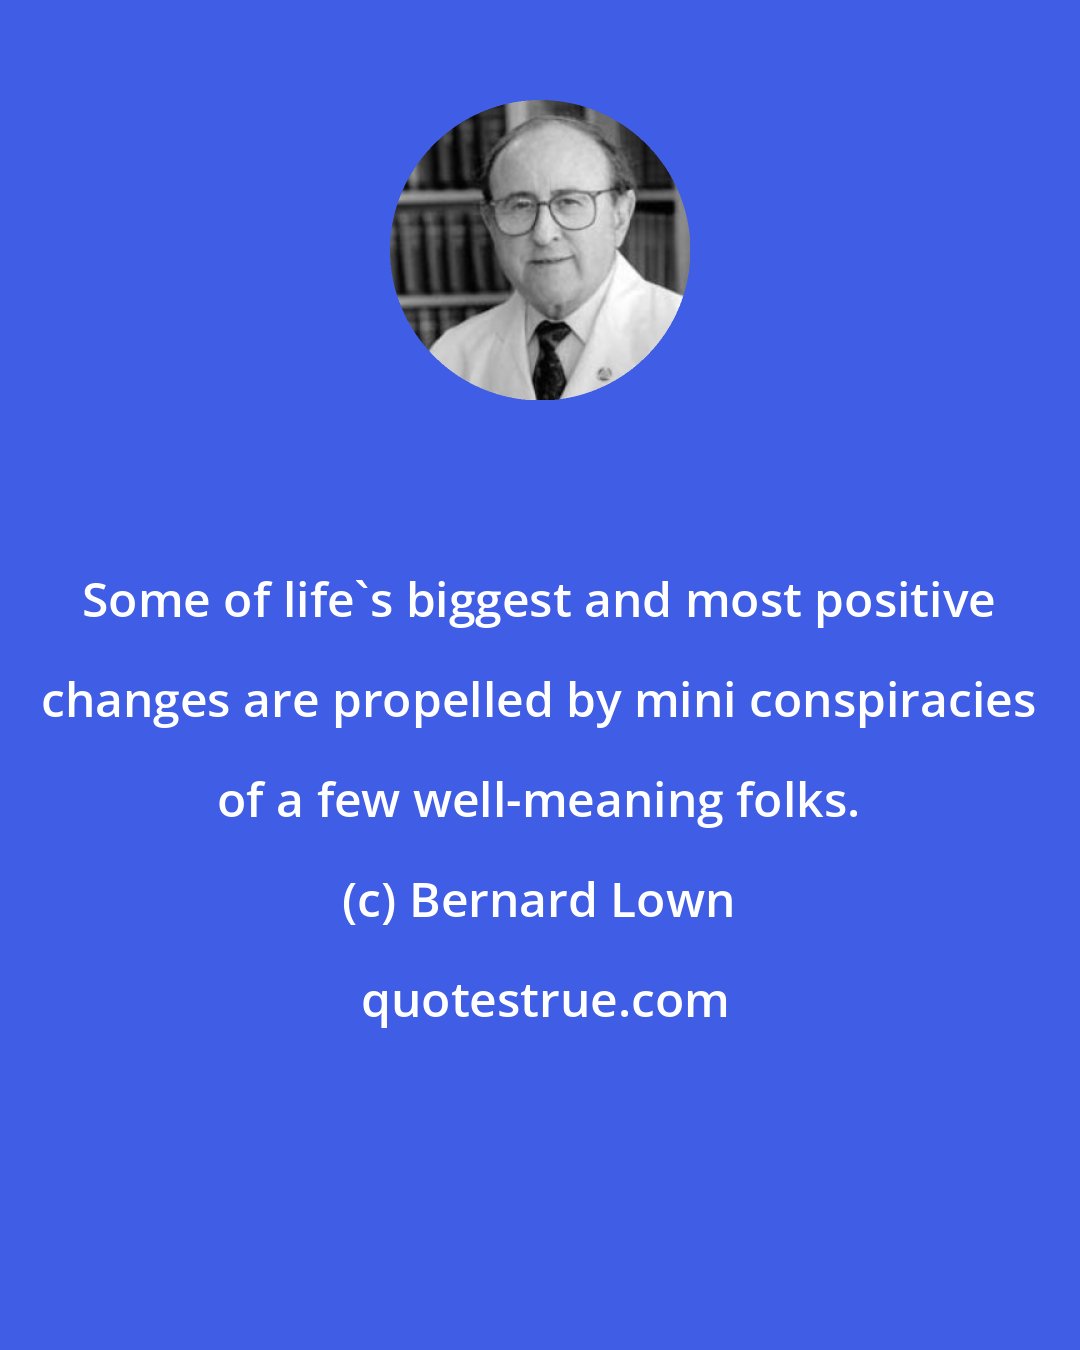 Bernard Lown: Some of life's biggest and most positive changes are propelled by mini conspiracies of a few well-meaning folks.